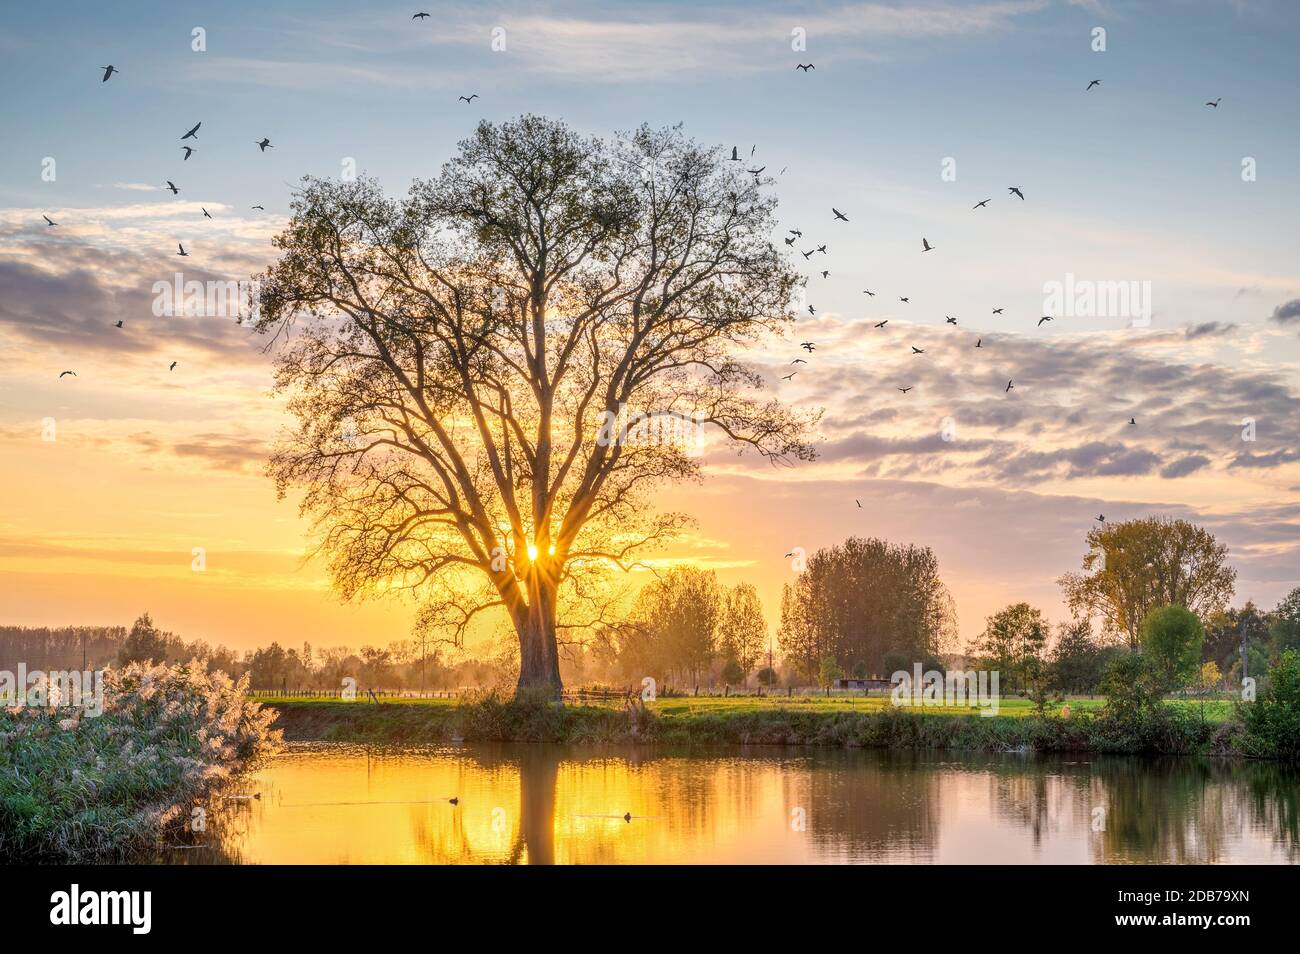 Flying cormorants around a Canadian poplar on a beautiful golden hour sunset Stock Photo